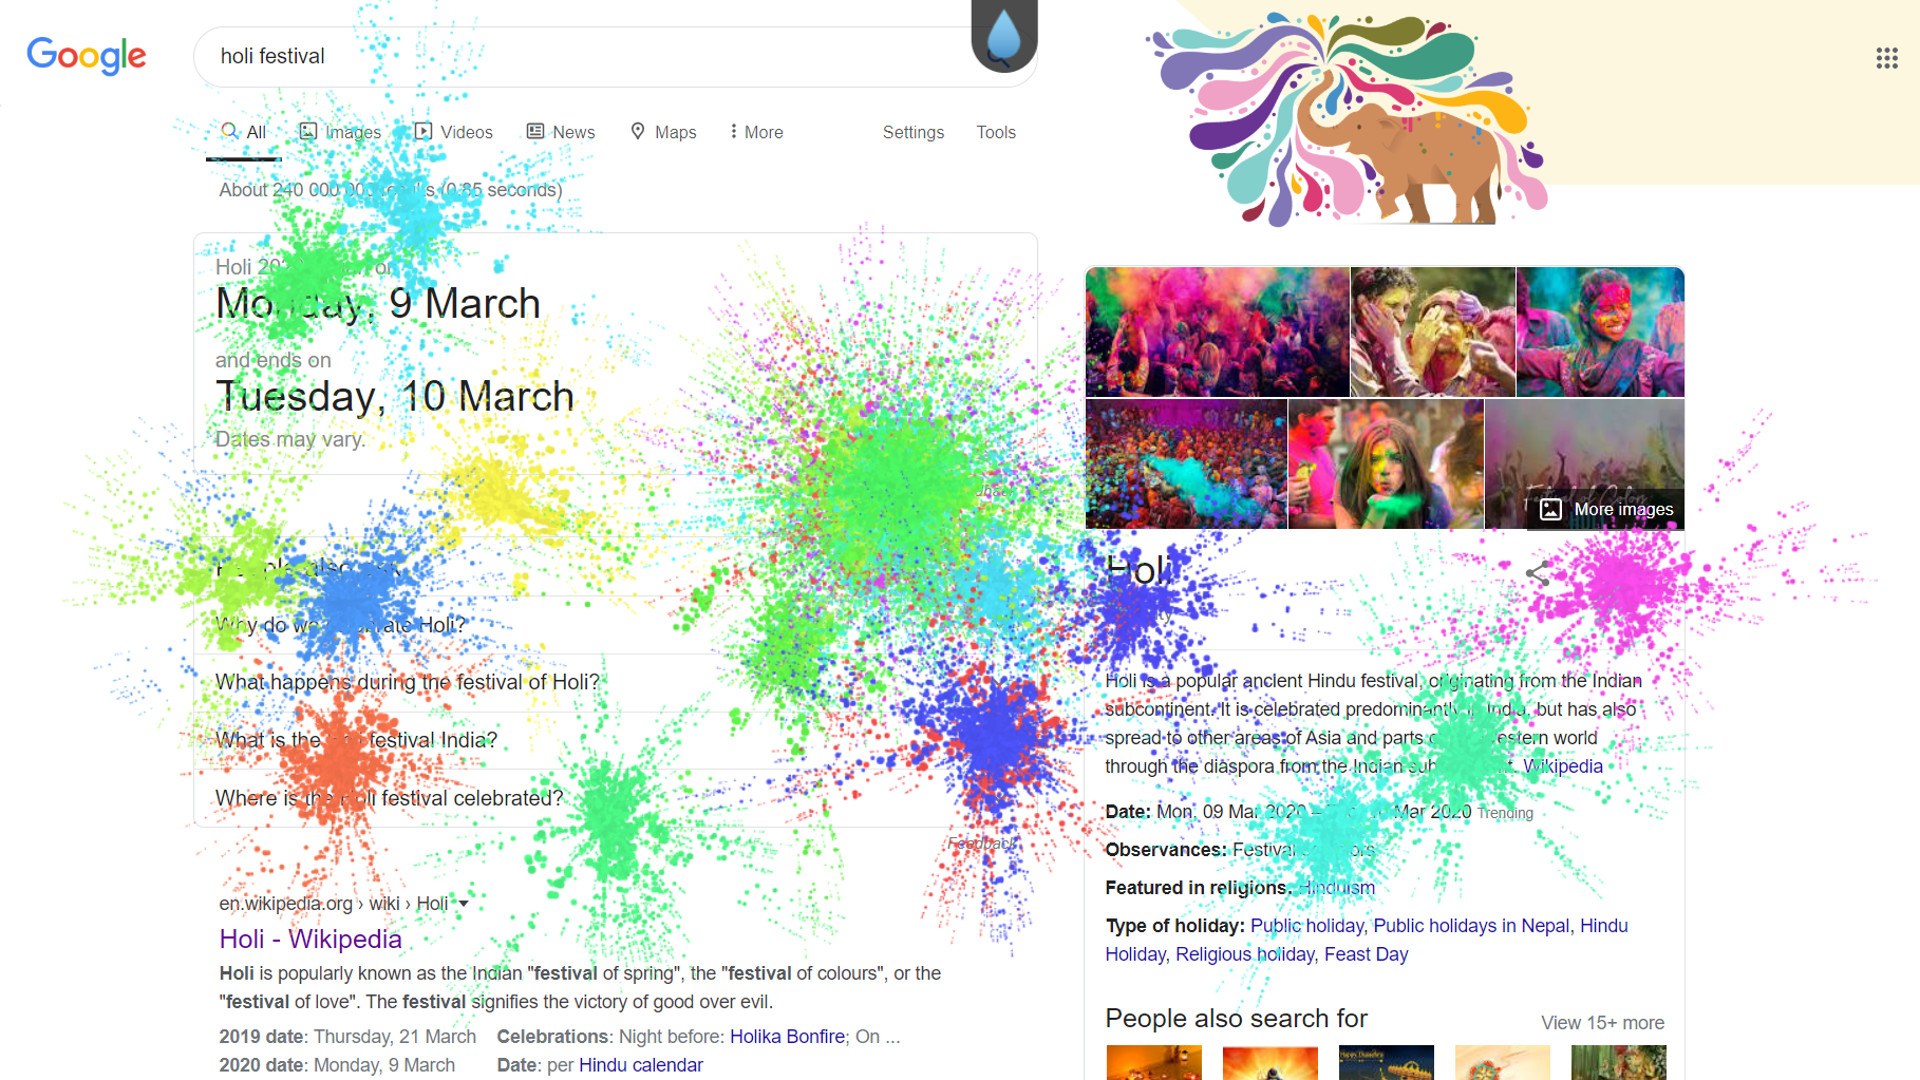 The holi easter egg on Google's search page.